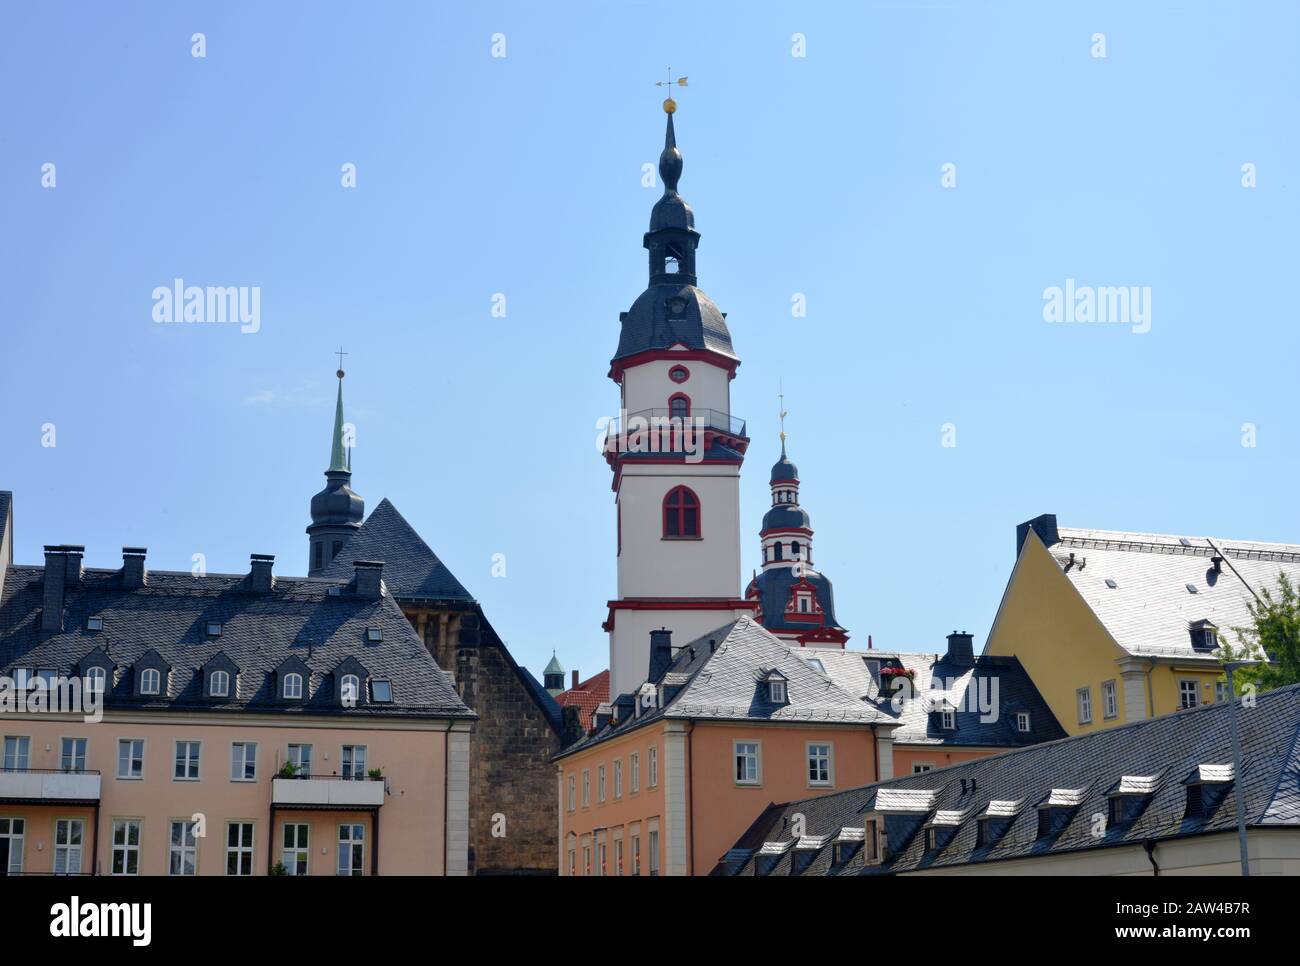 View to the town center of Chemnitz, Germany, with historical buildings tower ensemble Stock Photo